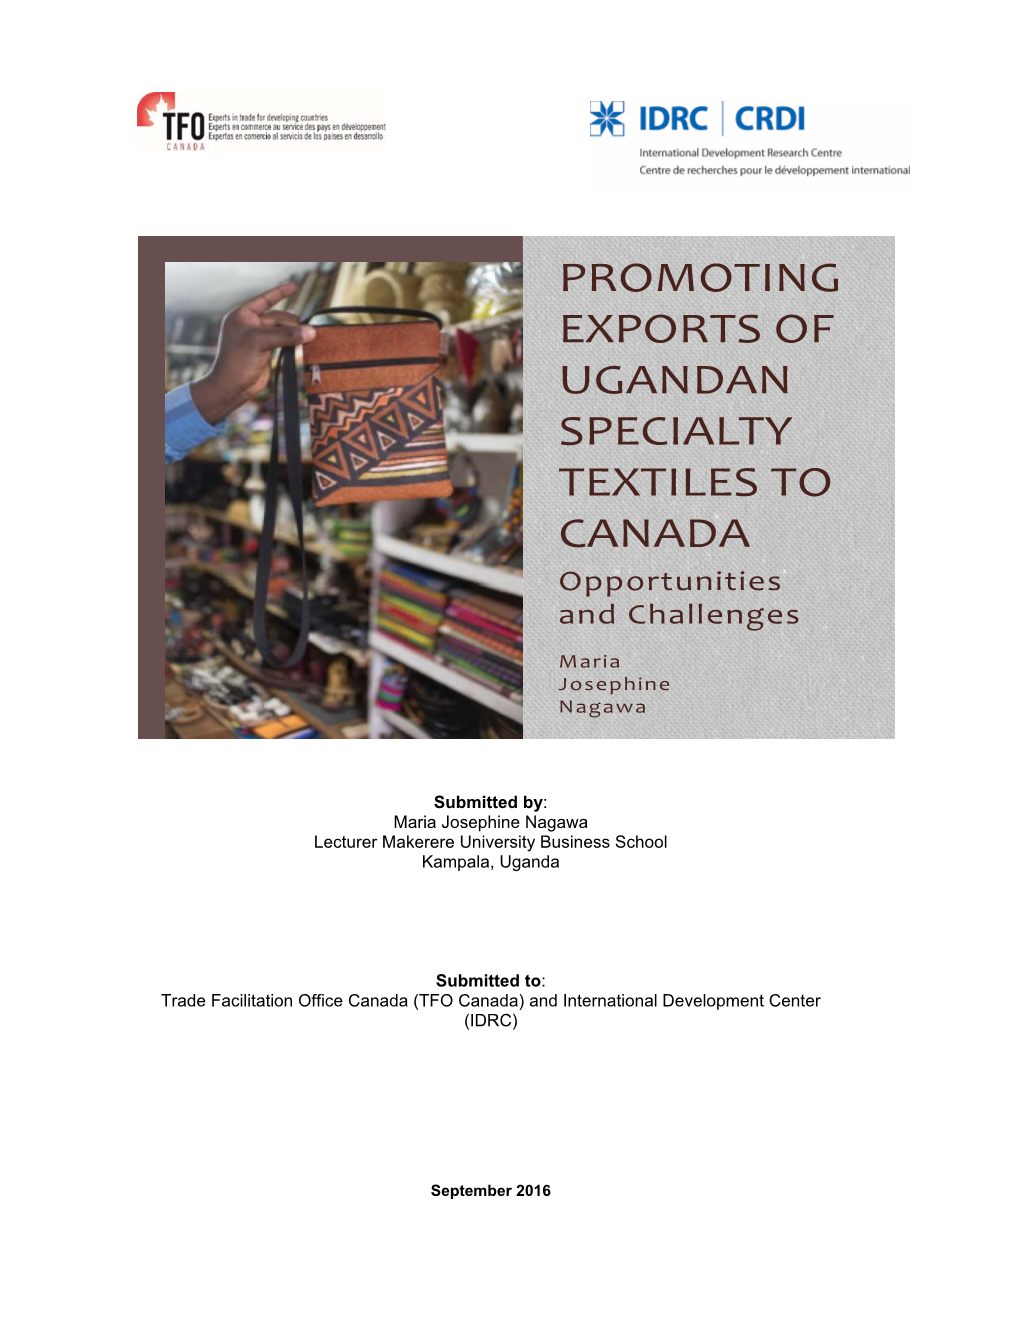 PROMOTING EXPORTS of UGANDAN SPECIALTY TEXTILES to CANADA Opportunities and Challenges